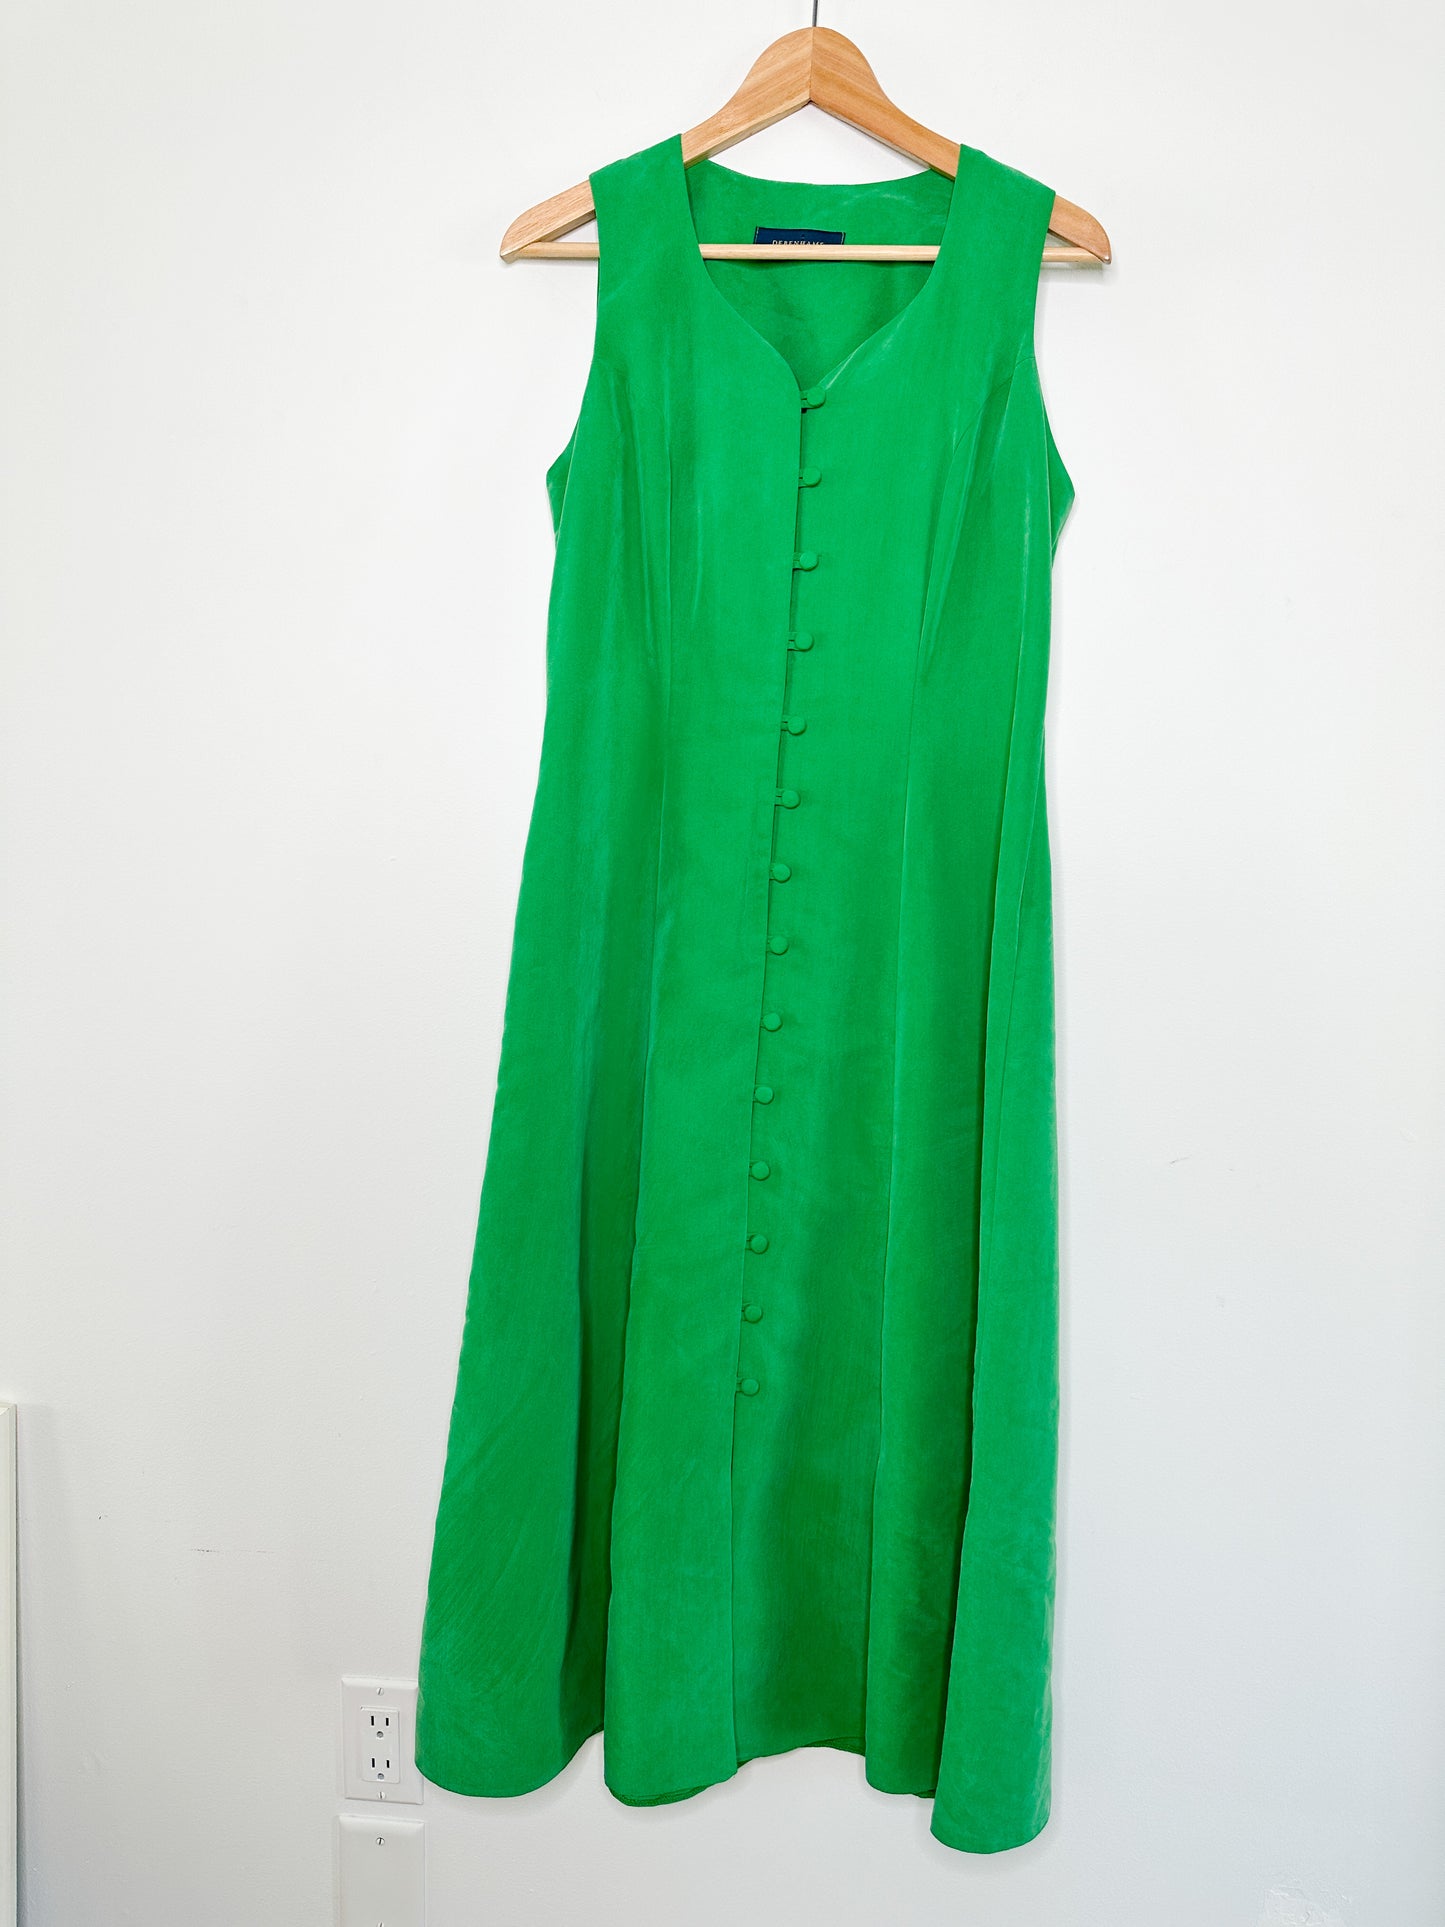 Vintage Debenhams Button Front Green Dress with Tie in the Back Size 12